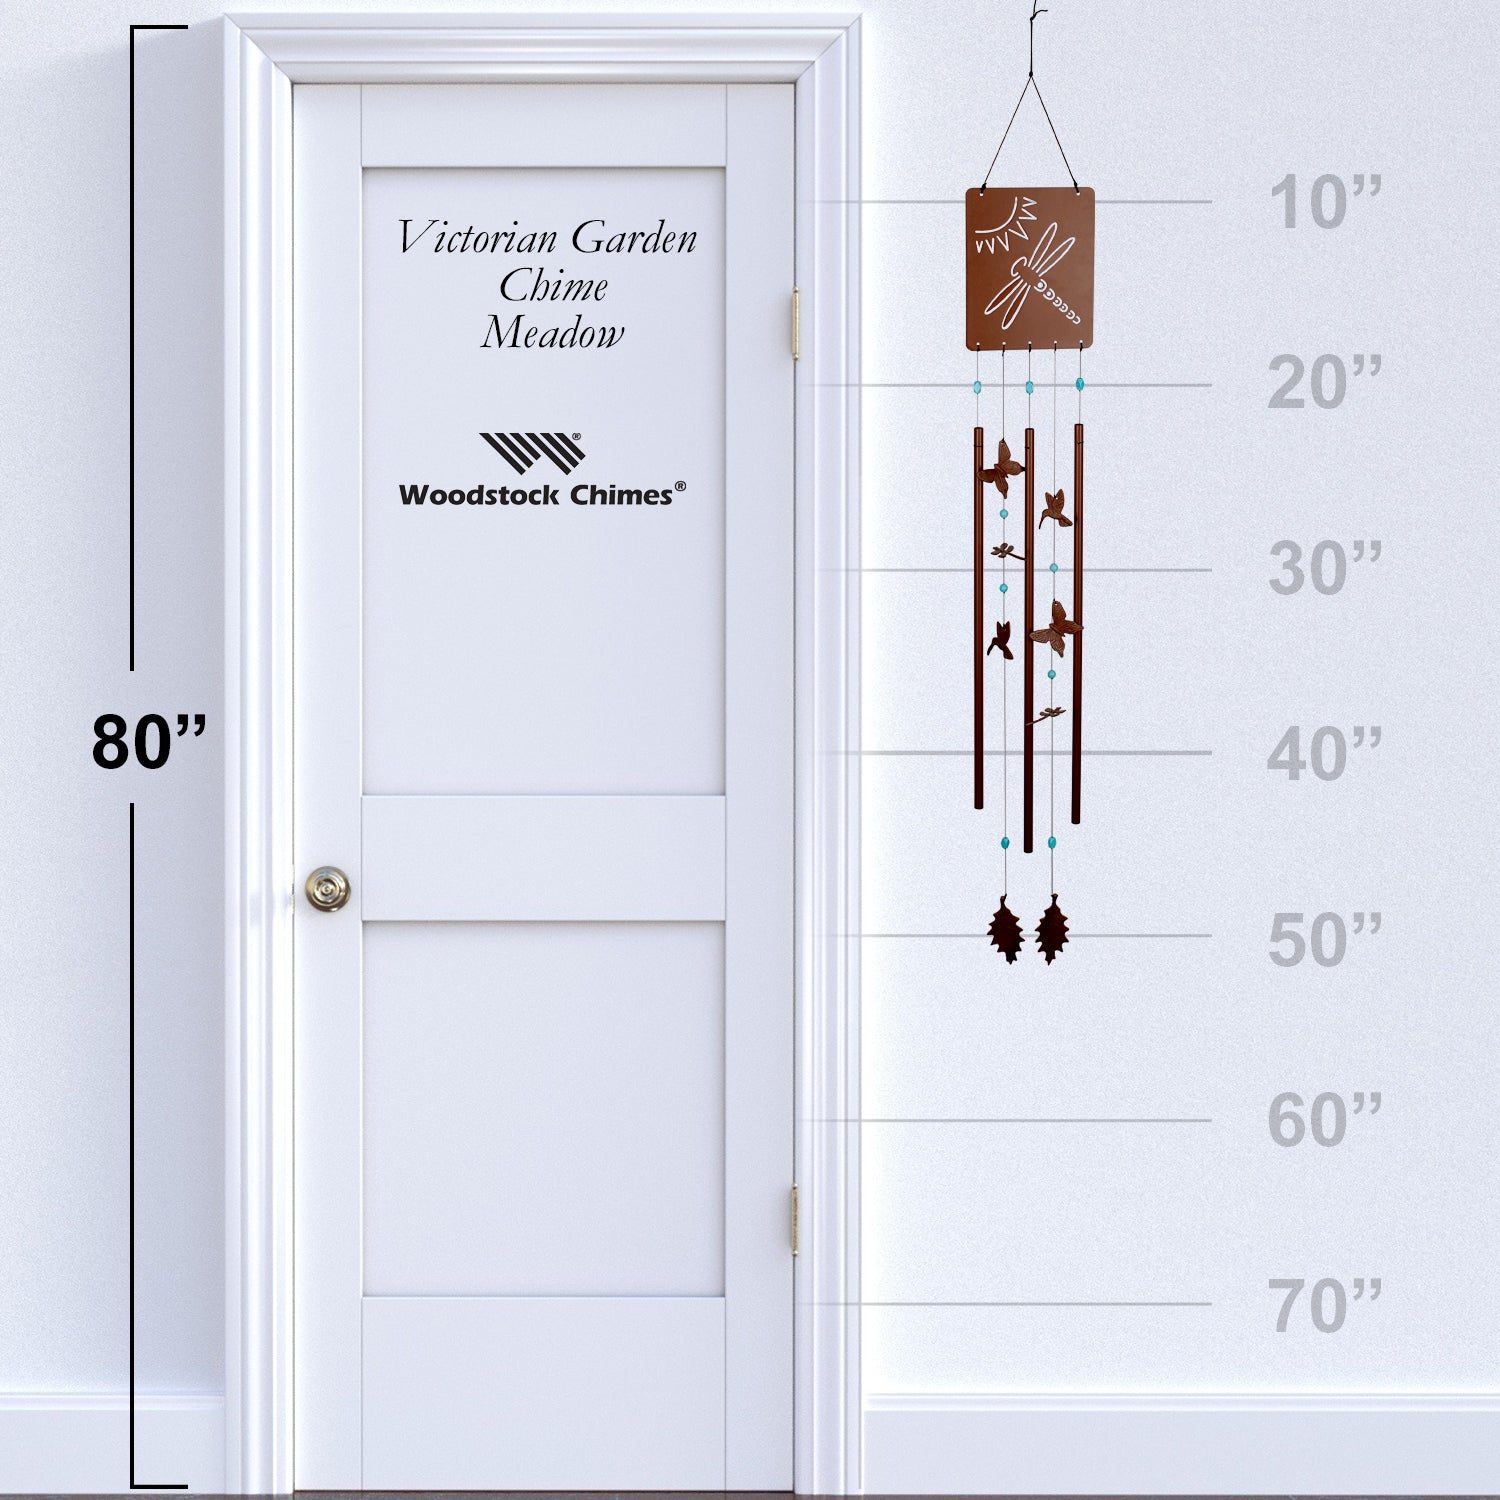 Victorian Garden Chime - Meadow proportion image